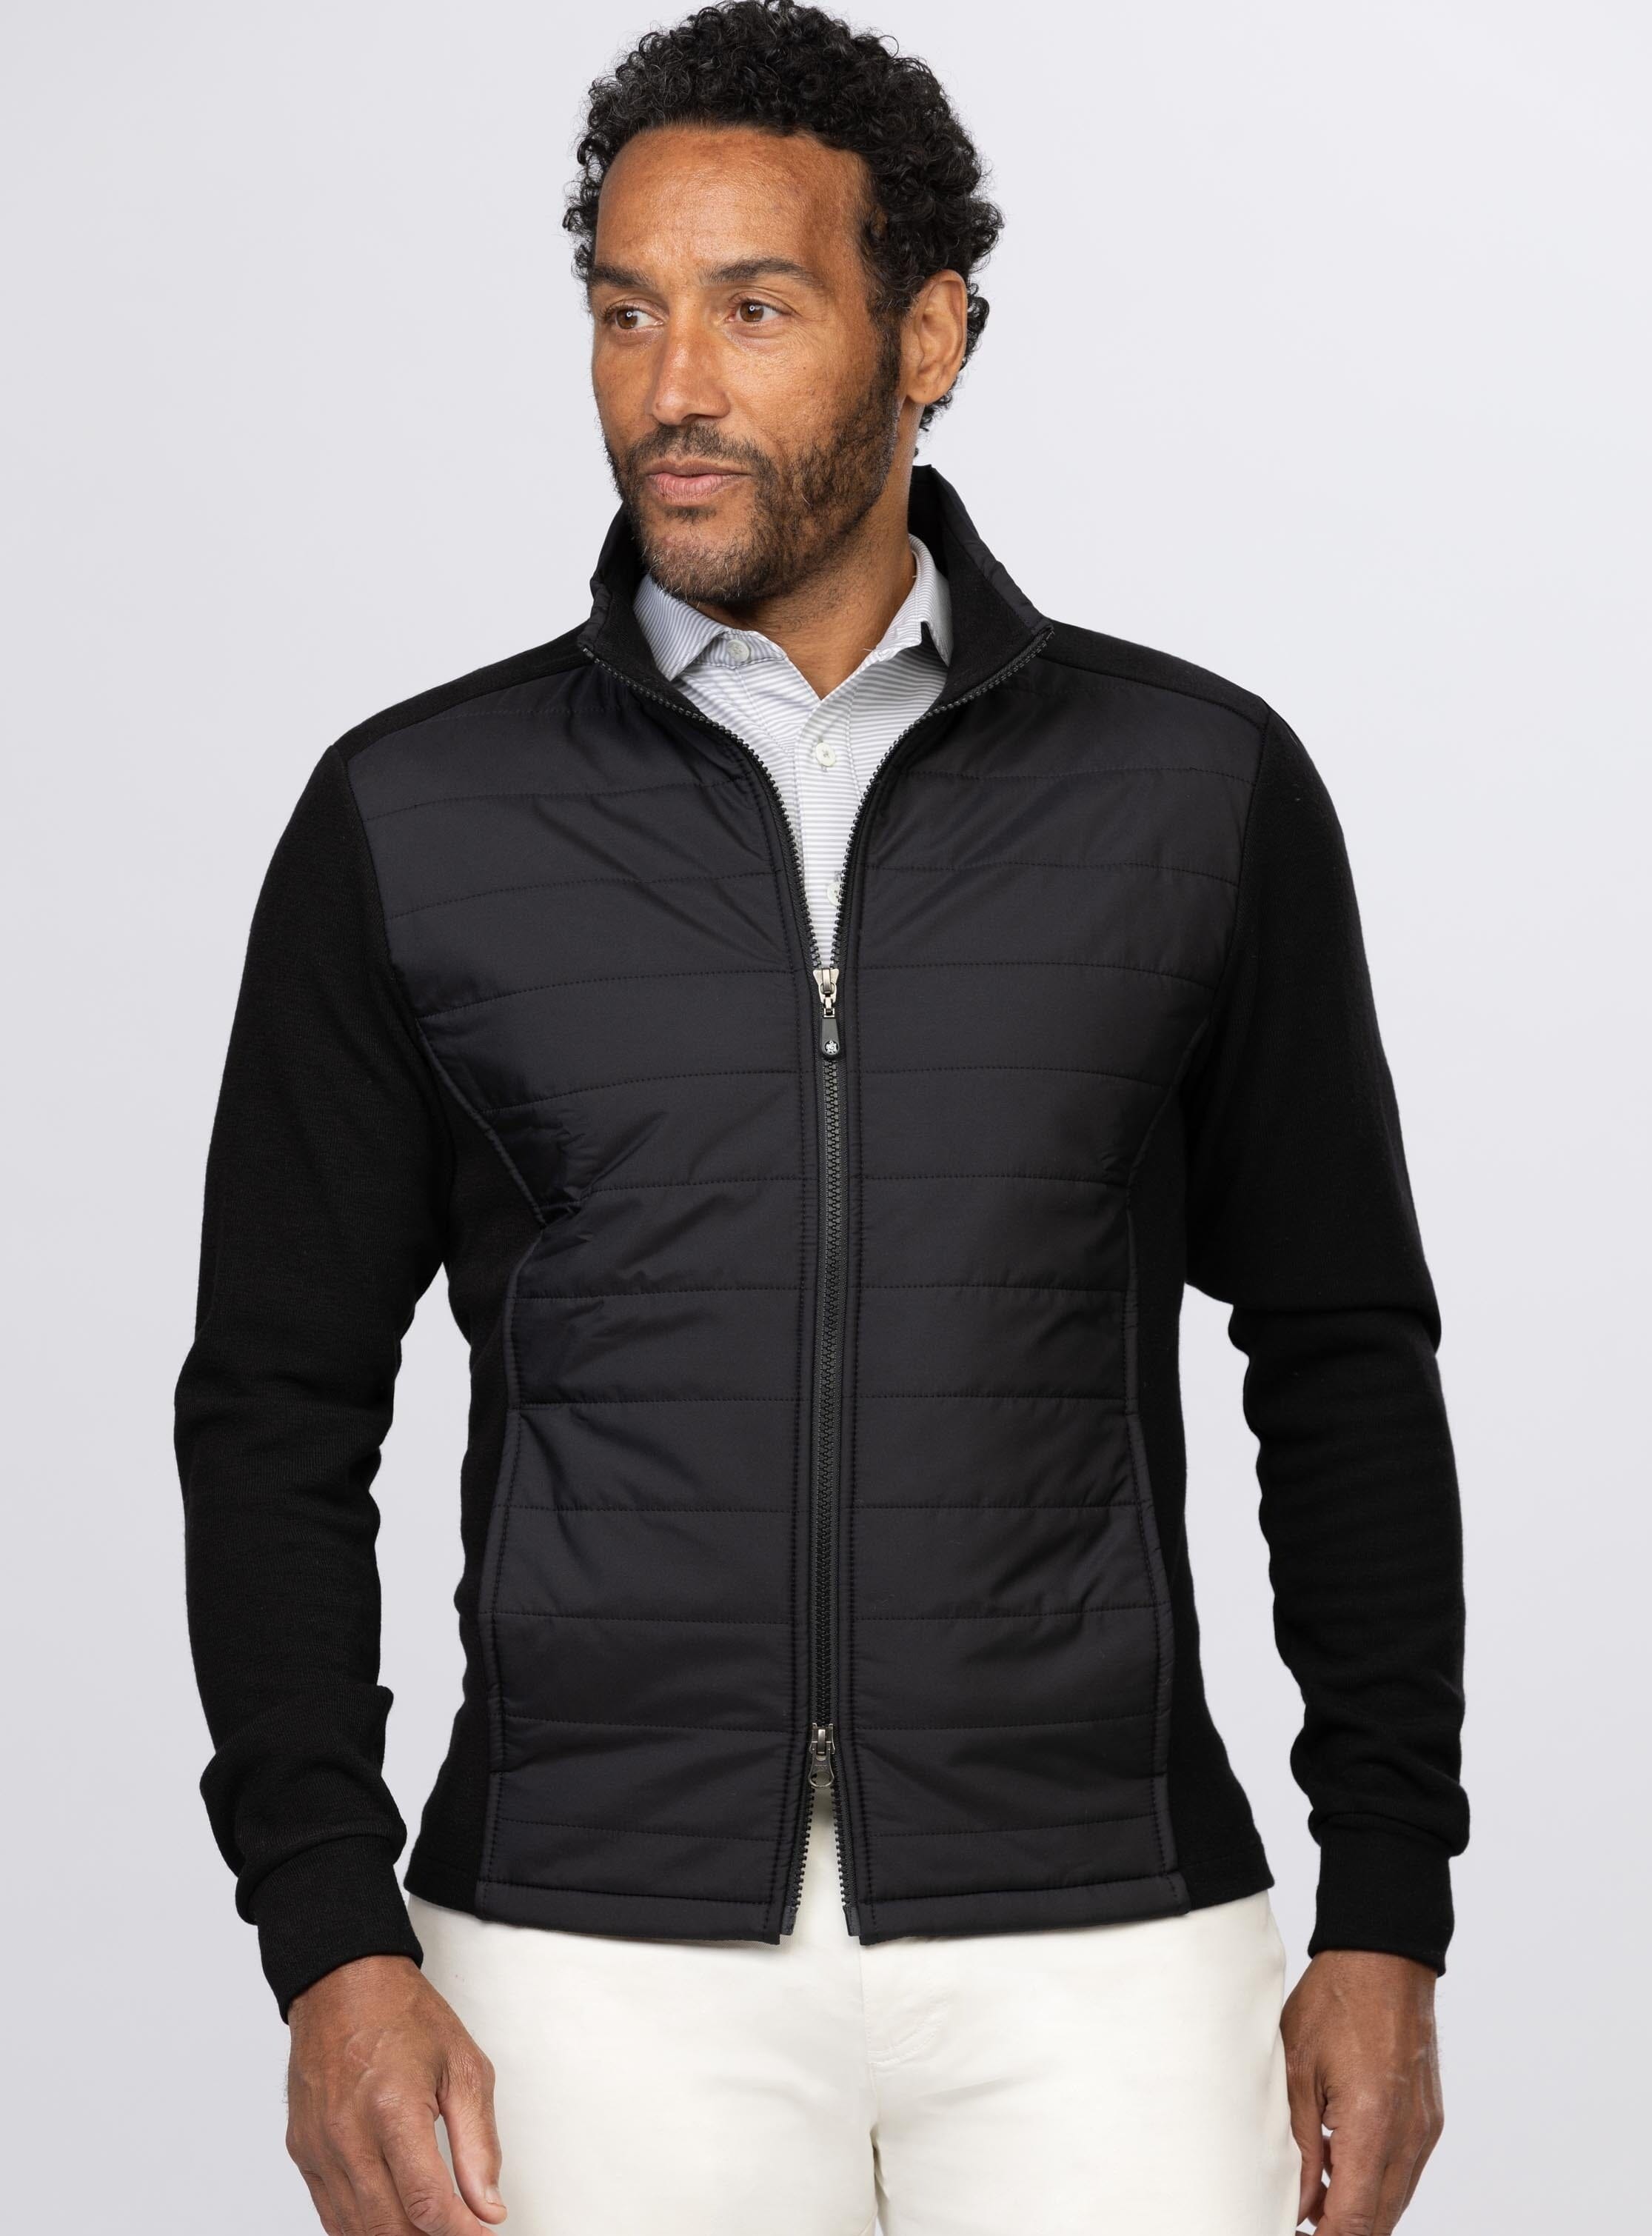 Buy Reiss Trainer Hybrid Zip Through Quilted Jumper from Next USA